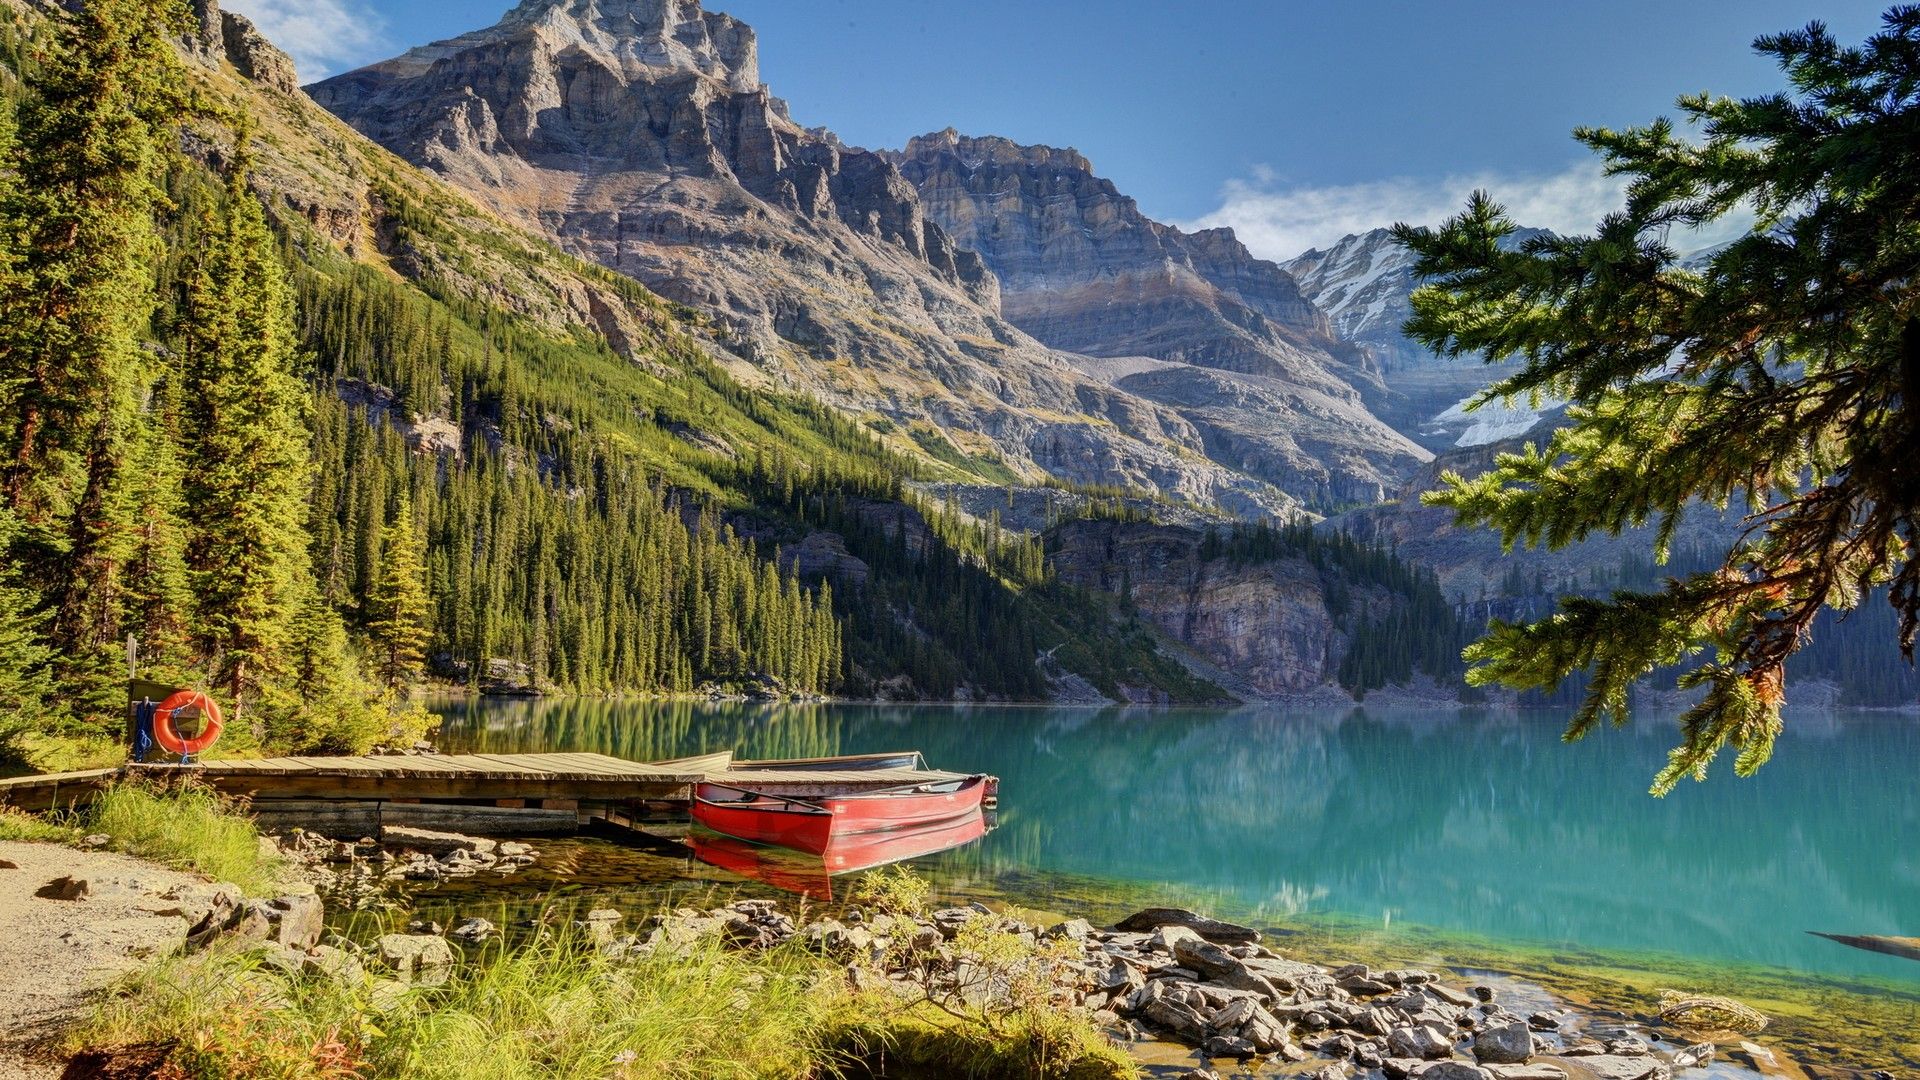 #lake, #mountains, #trees, #landscape, #boat, #water